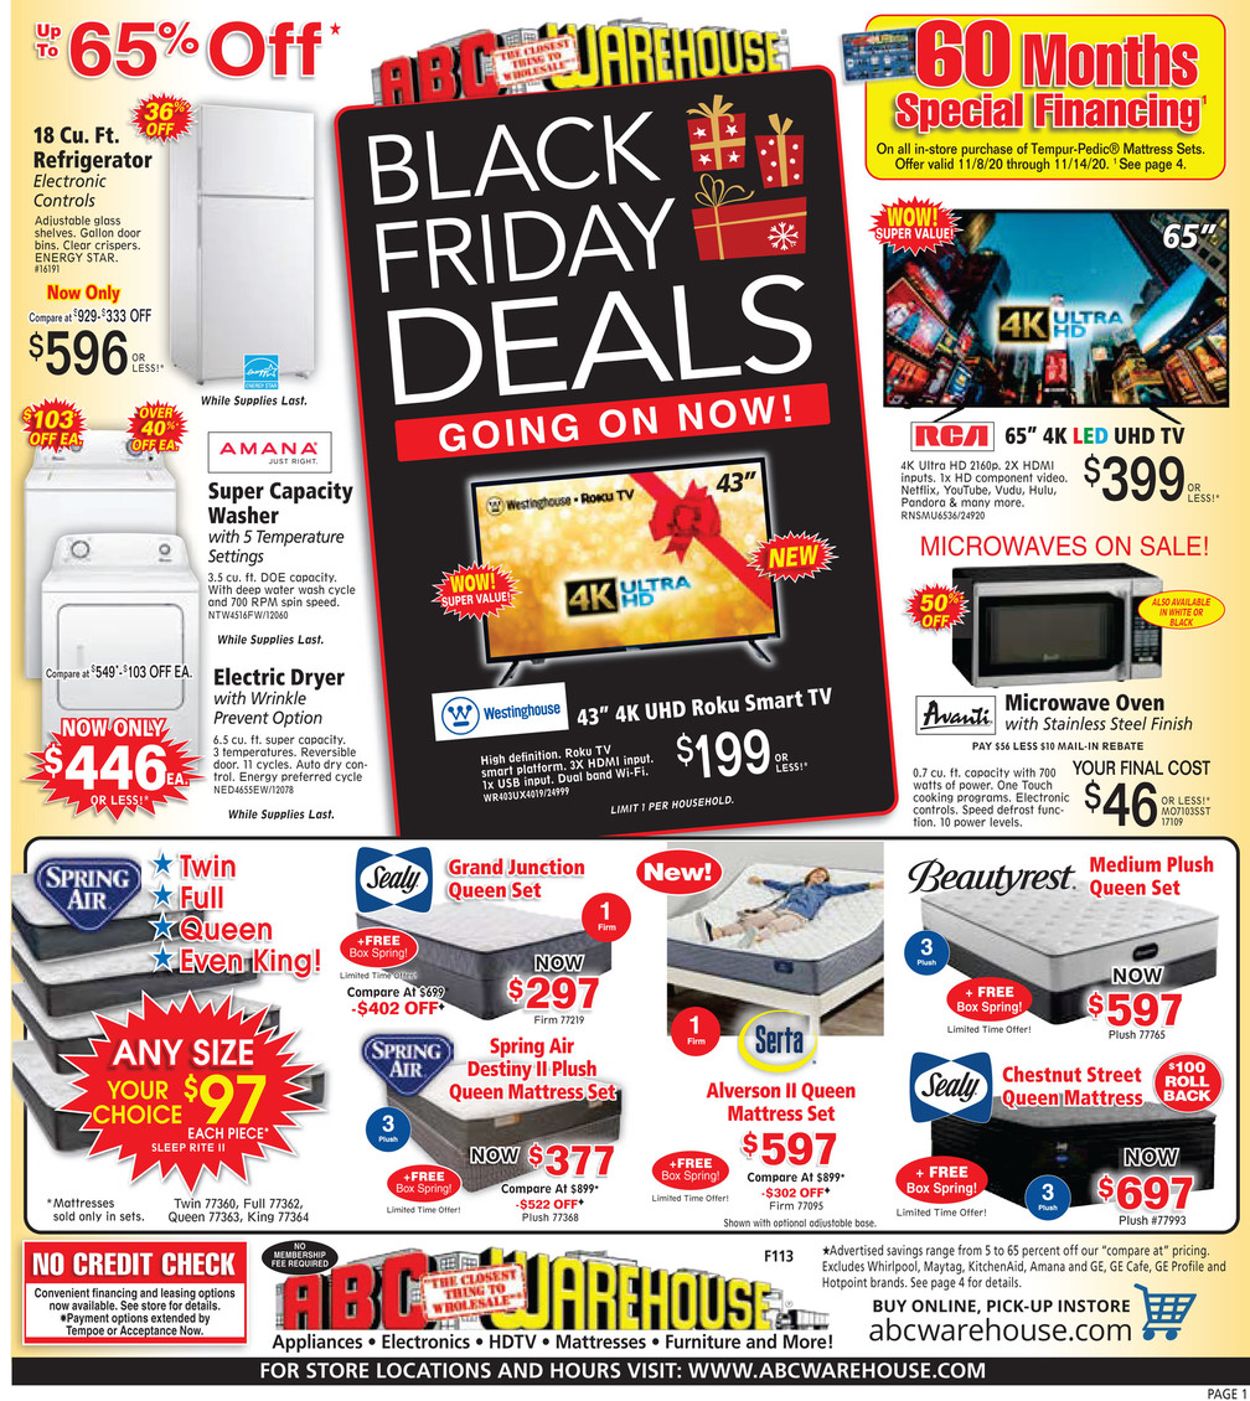 ABC Warehouse Black Friday 2020 Current weekly ad 11/08 - 11/14/2020 ...